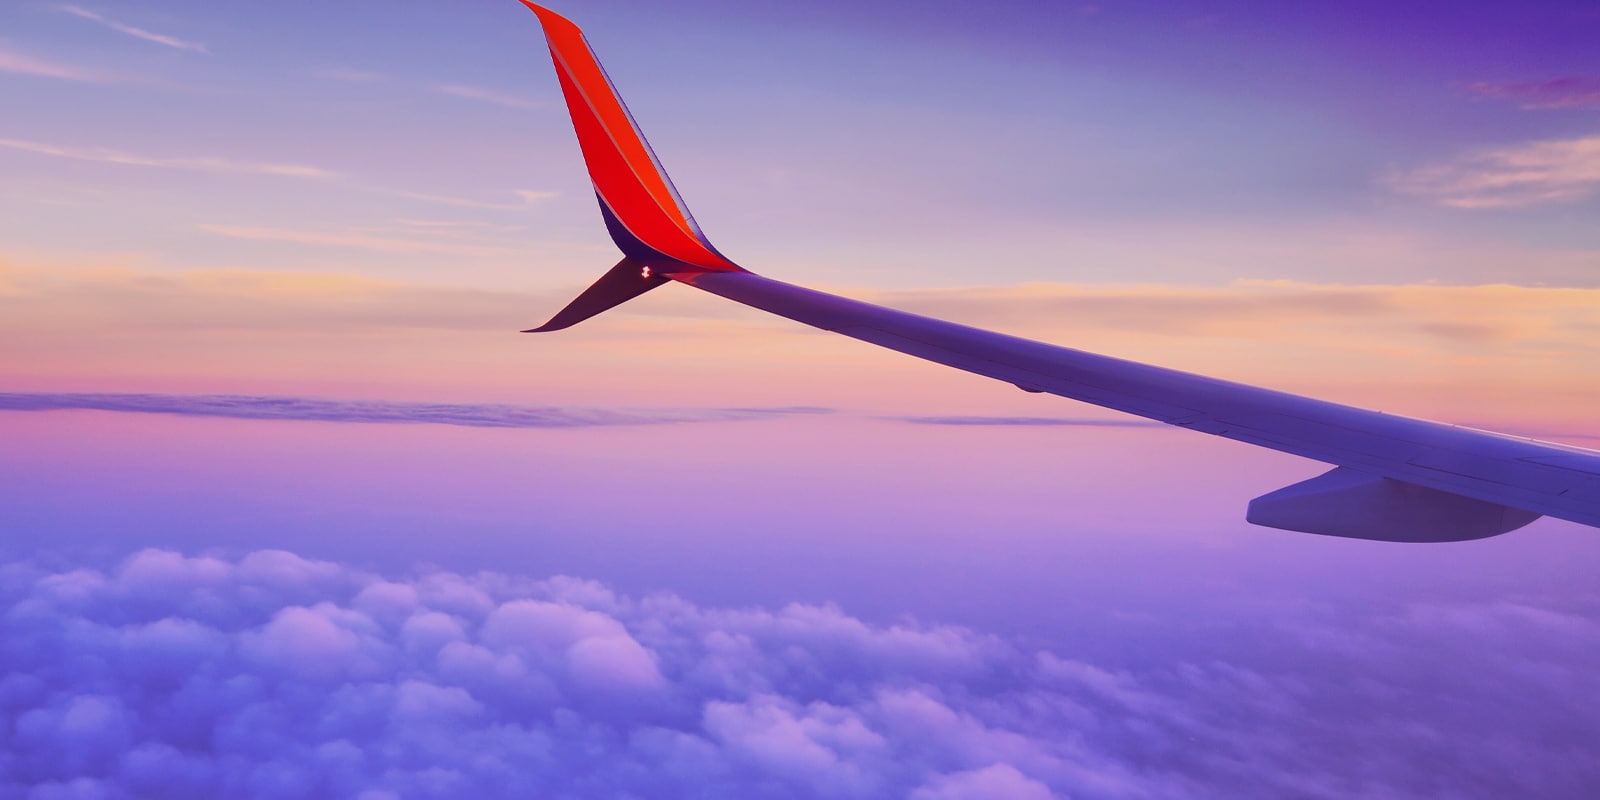 An image of an airplane wing